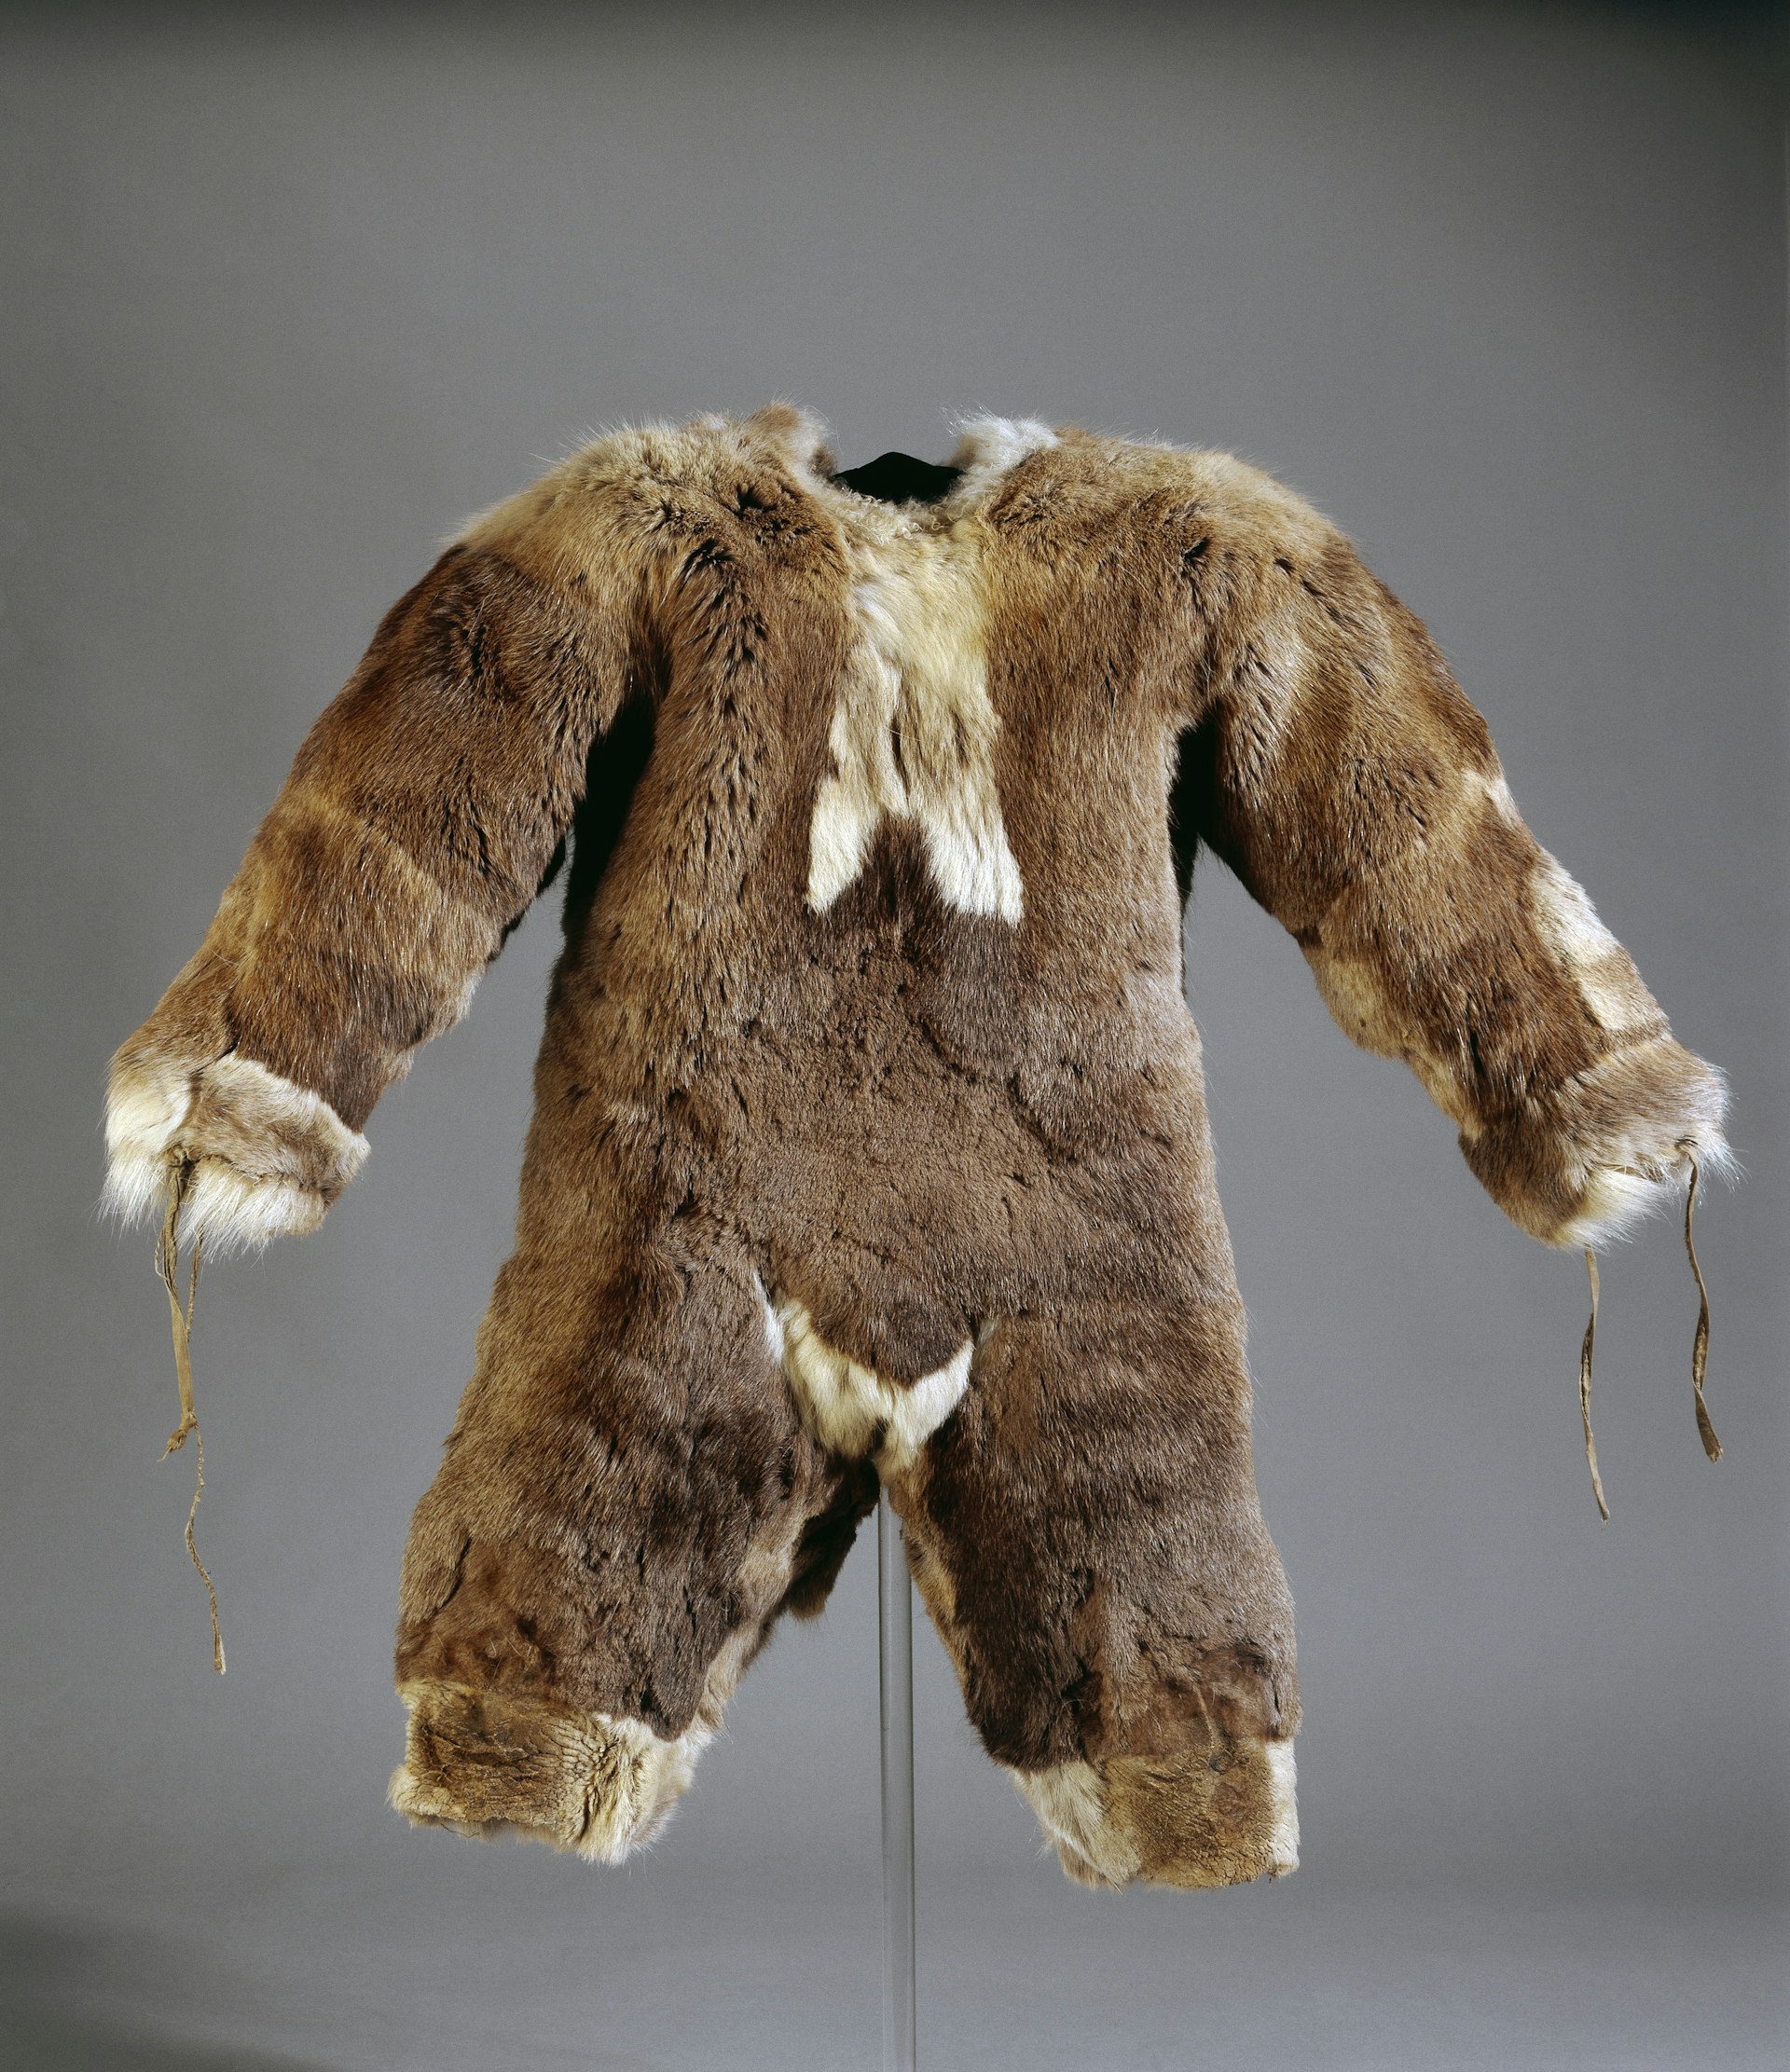 Childs all in one Arctic suit made from caribou fur